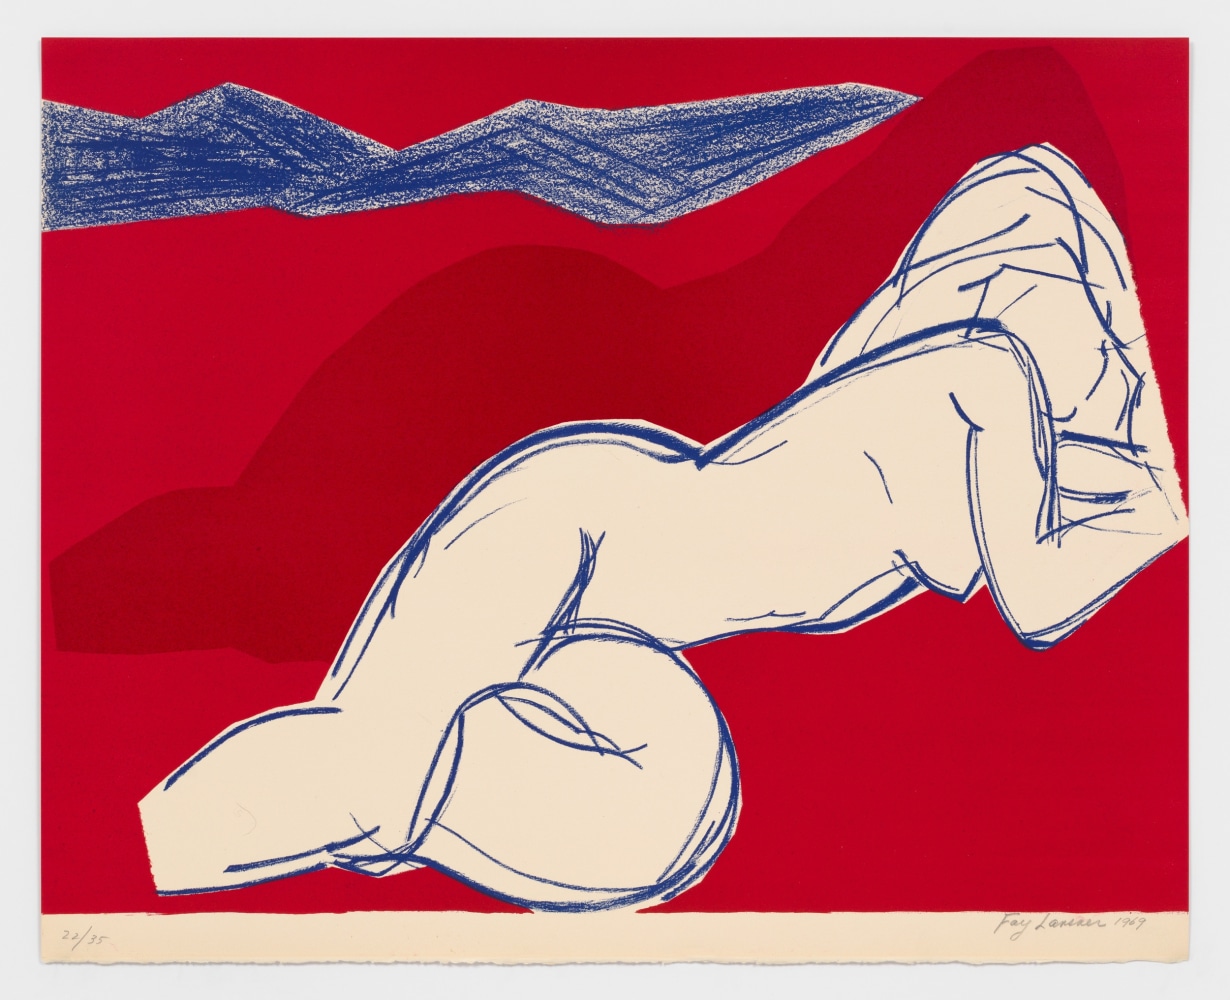 Fay Lansner

Red and Blue, 1968
lithograph, ed of 35
22 1/2 x 26 3/4 in. / 57.1 x 68 cm